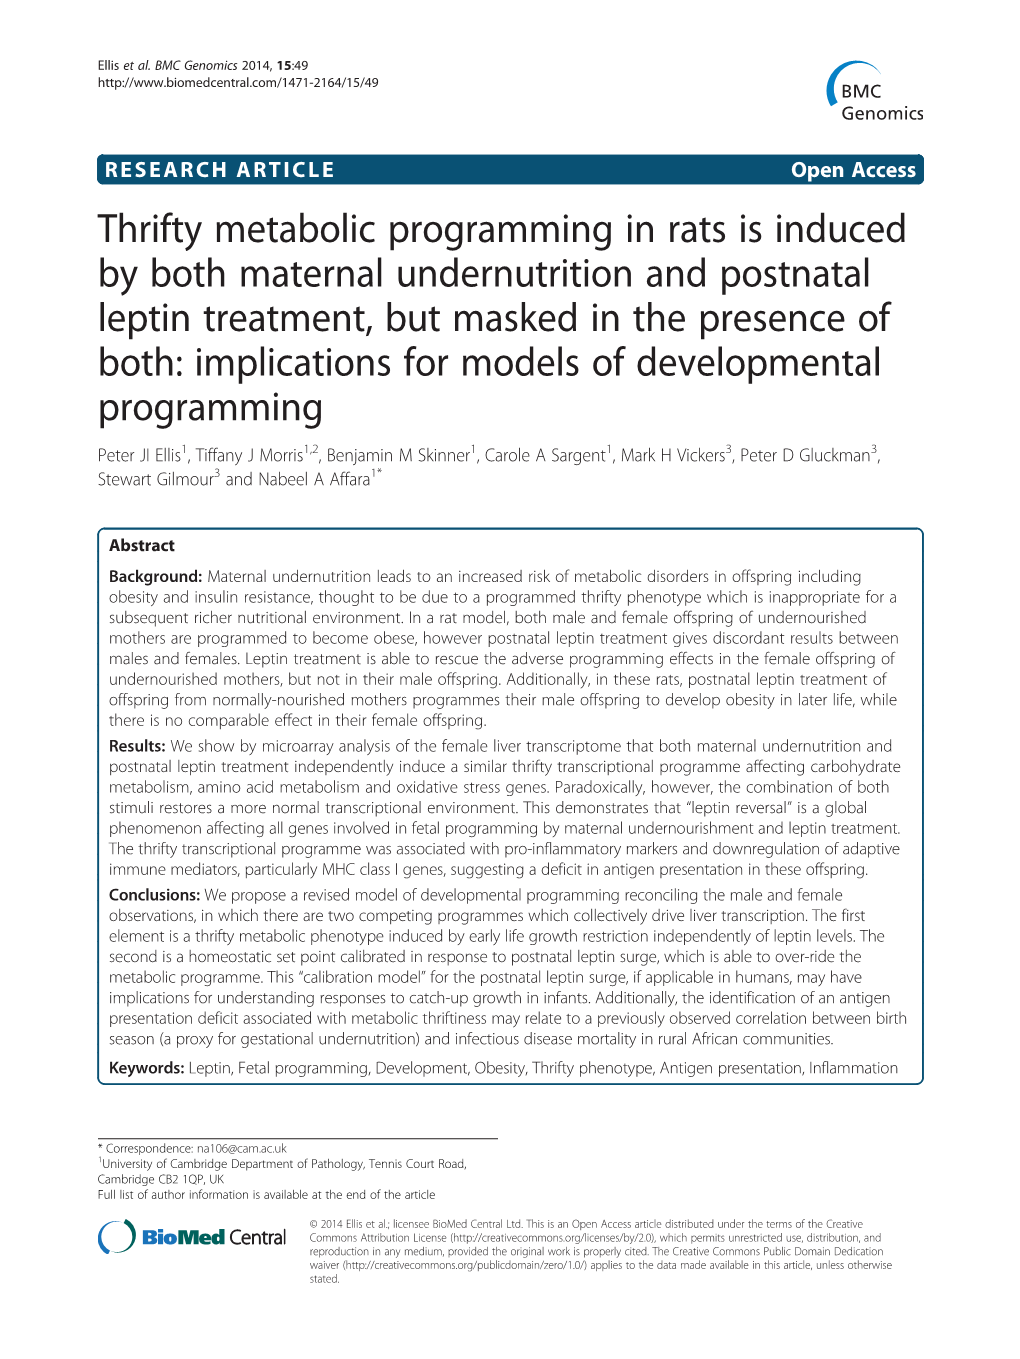 Thrifty Metabolic Programming in Rats Is Induced by Both Maternal